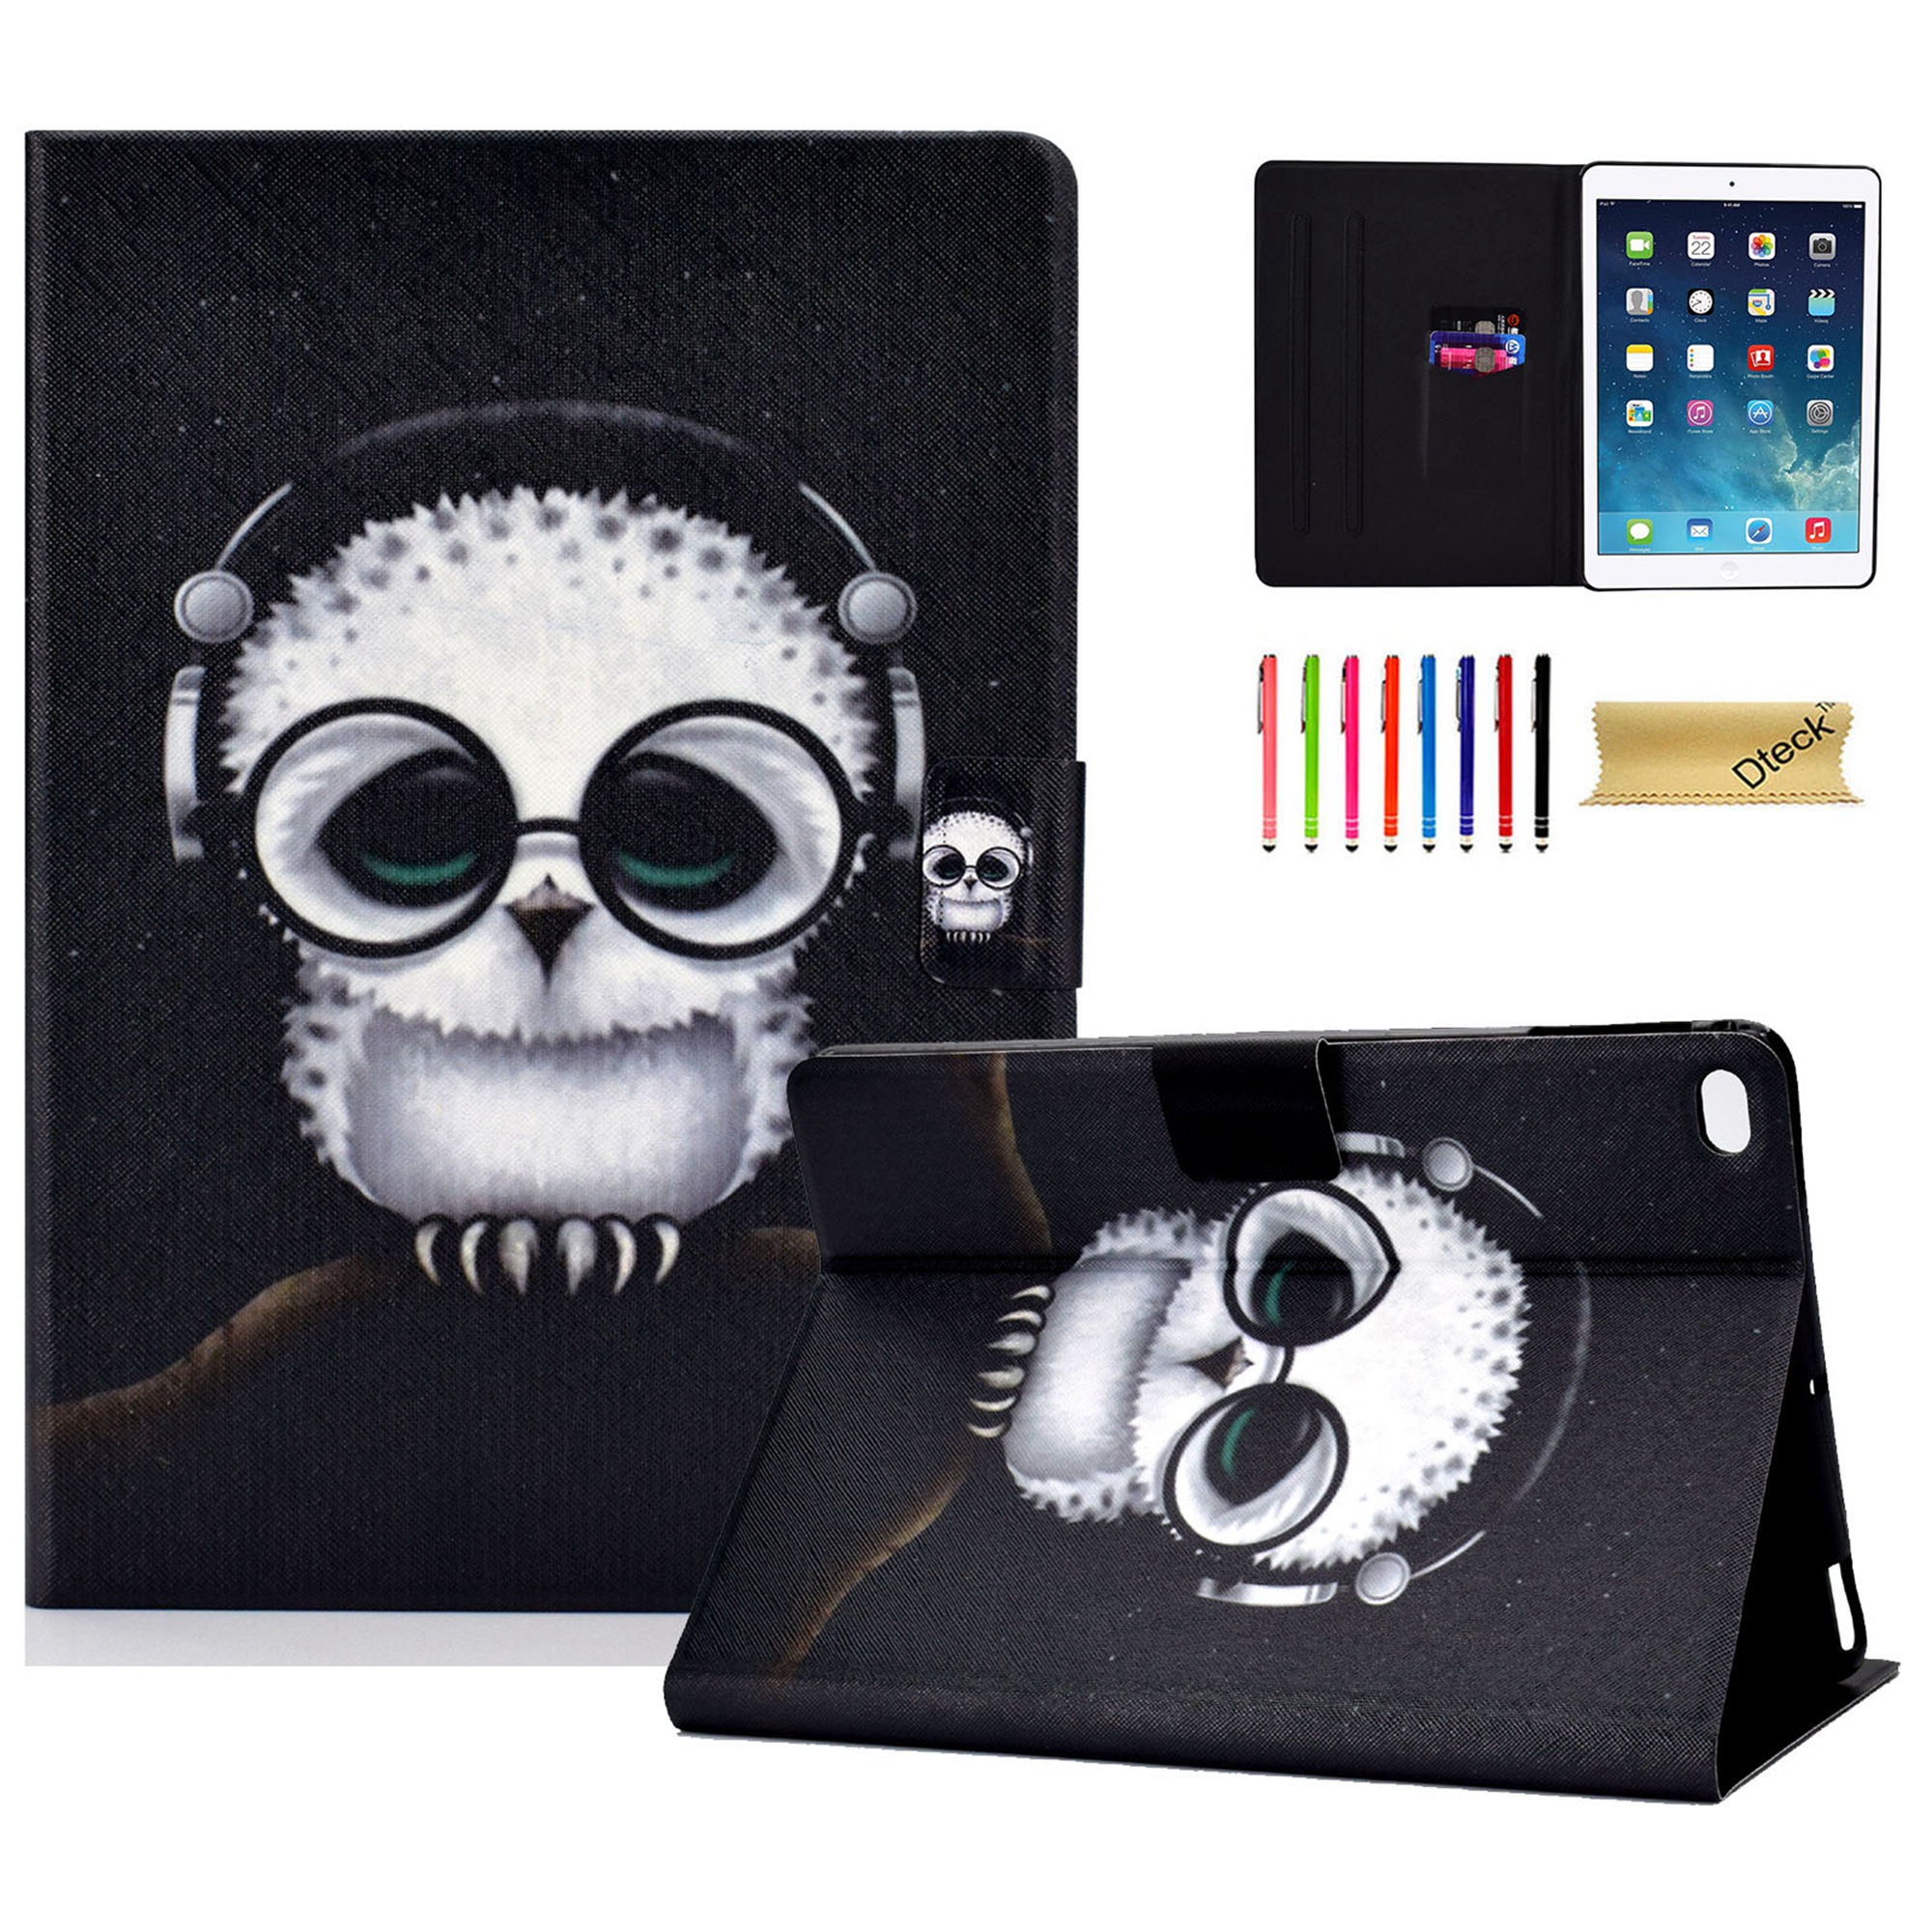 iPad 9.7 inch 2018 2017 Case/iPad Air Case/iPad Air 2 Case/iPad Pro 9.7 Case, Dteck PU Leather Folio Smart Cover with Auto Sleep Wake Stand Wallet Case For Apple iPad 9.7" (Not fit iPad 2 3 4), Owl - image 1 of 1